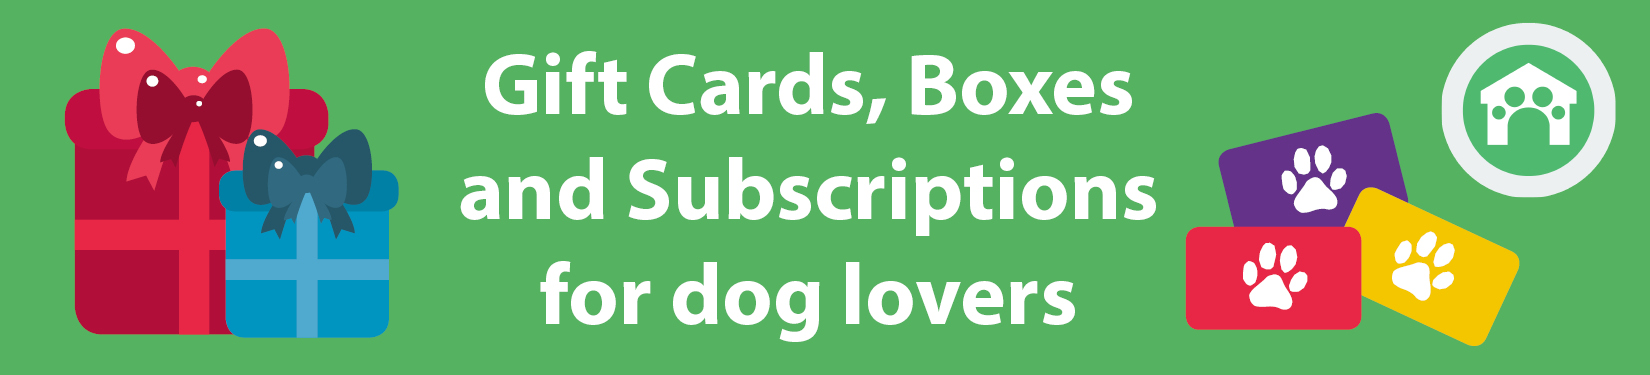 Gift cards, boxes and subscription gifts for dog lovers header image